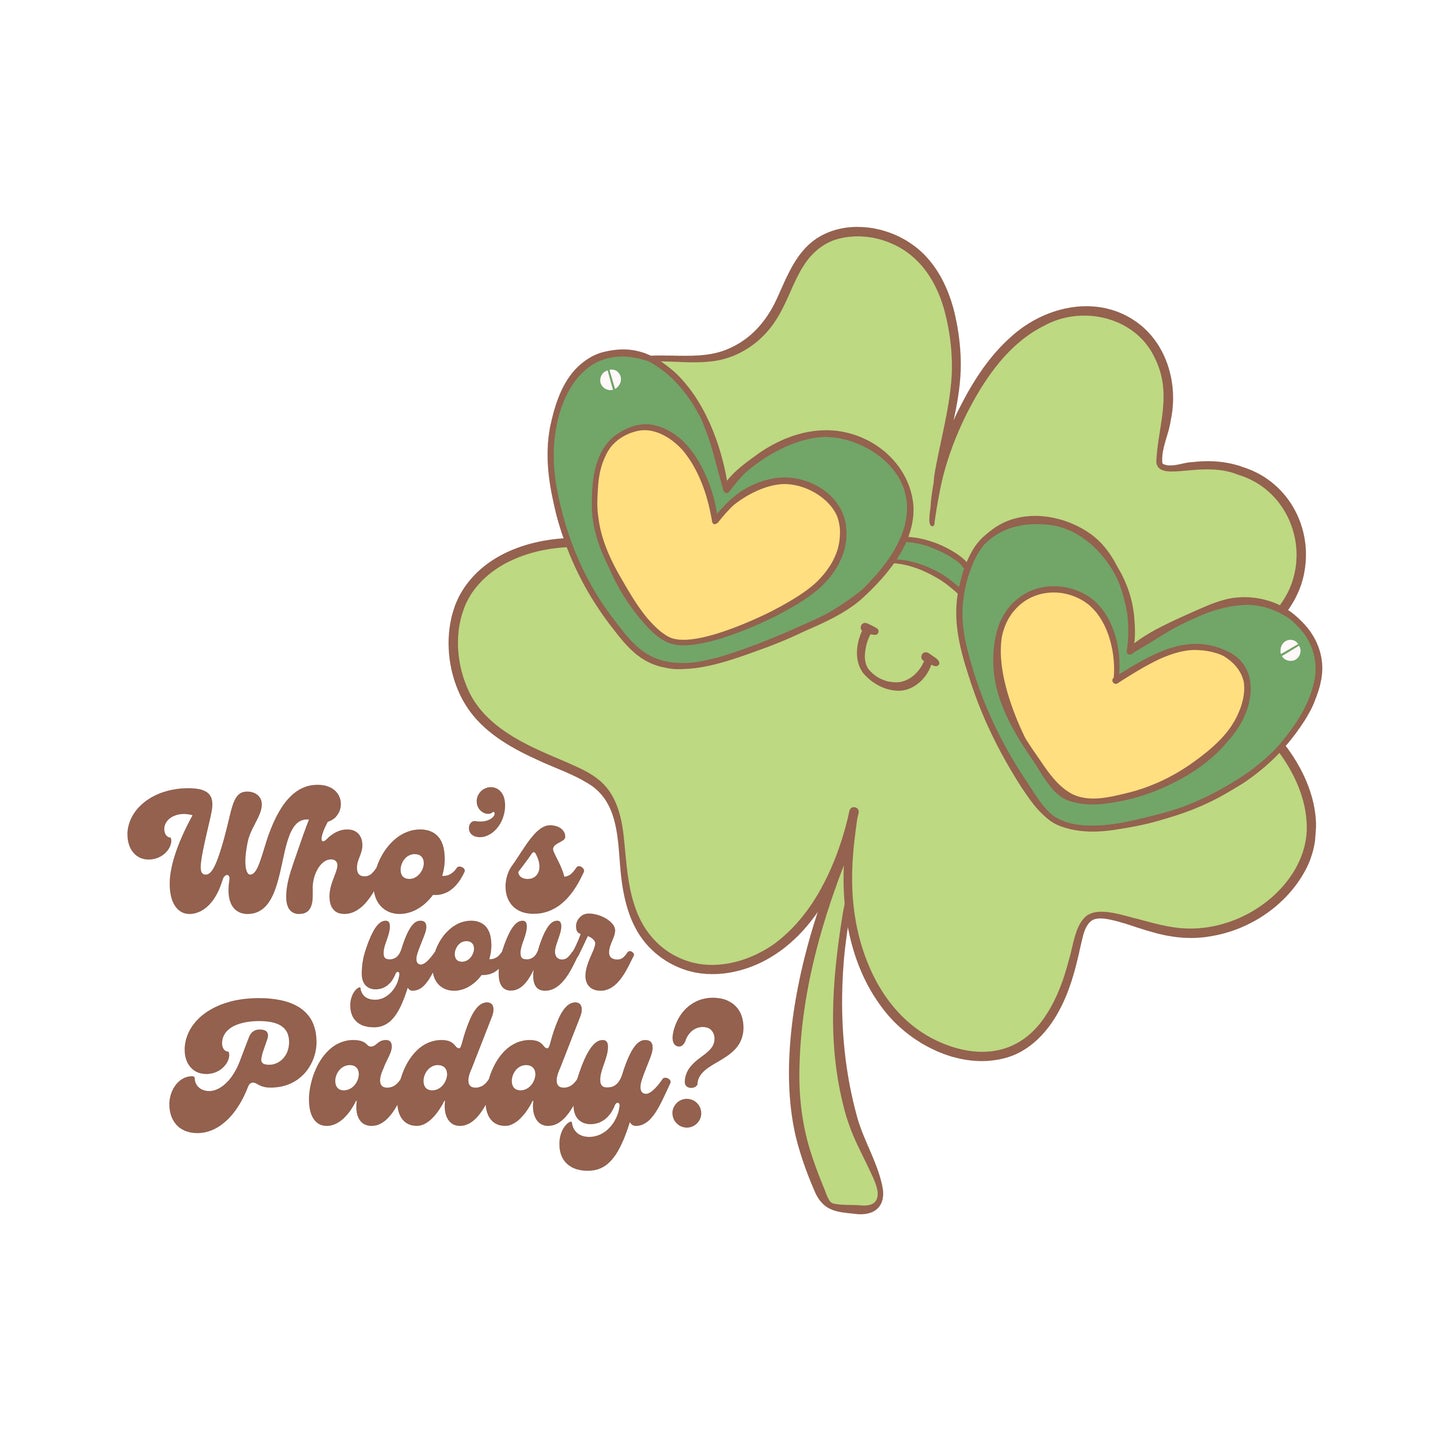 Who's your Paddy?